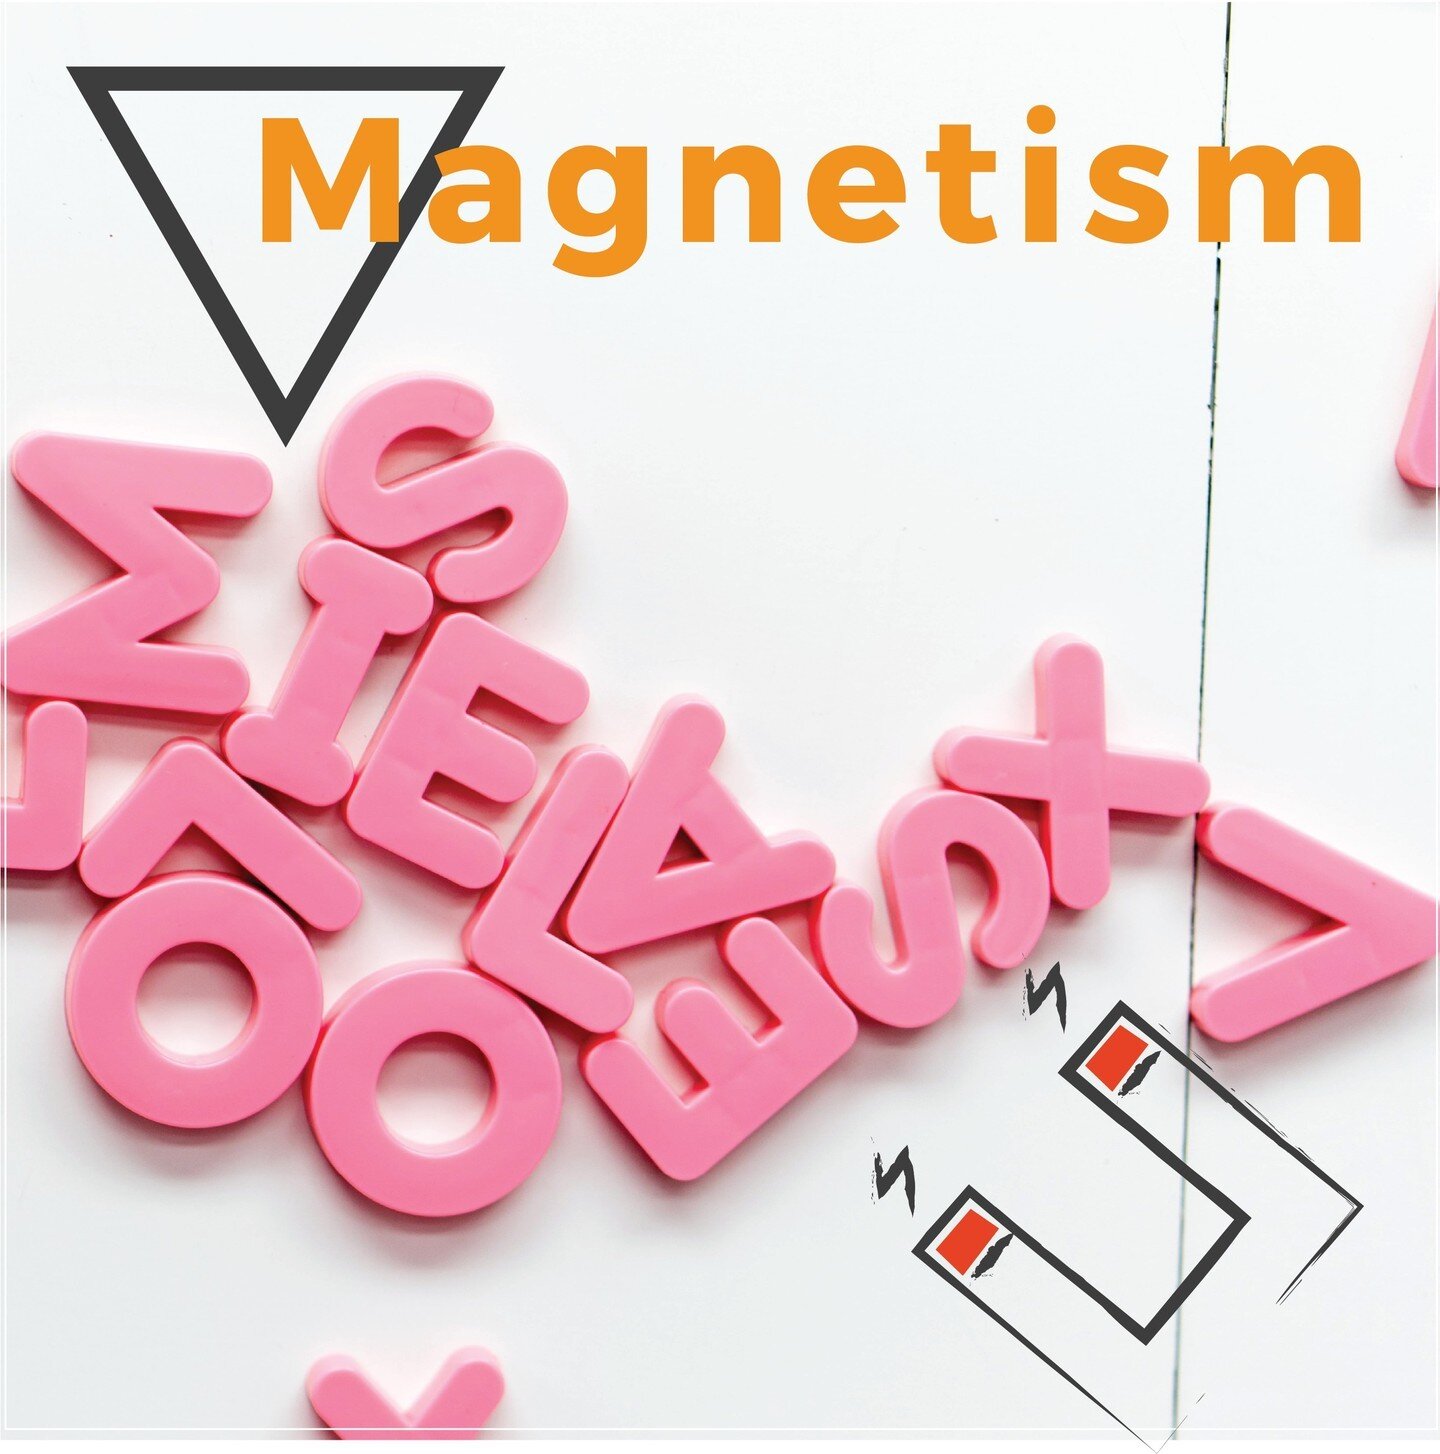 Ready to find out more about the next elevation of CX and loyalty? Customer loyalty programmes today must be focussed on building brand magnetism.

Read more here: https://www.thisismotif.com/what-is-magnetism

#magnetism #loyalty #cx #levelup #resea